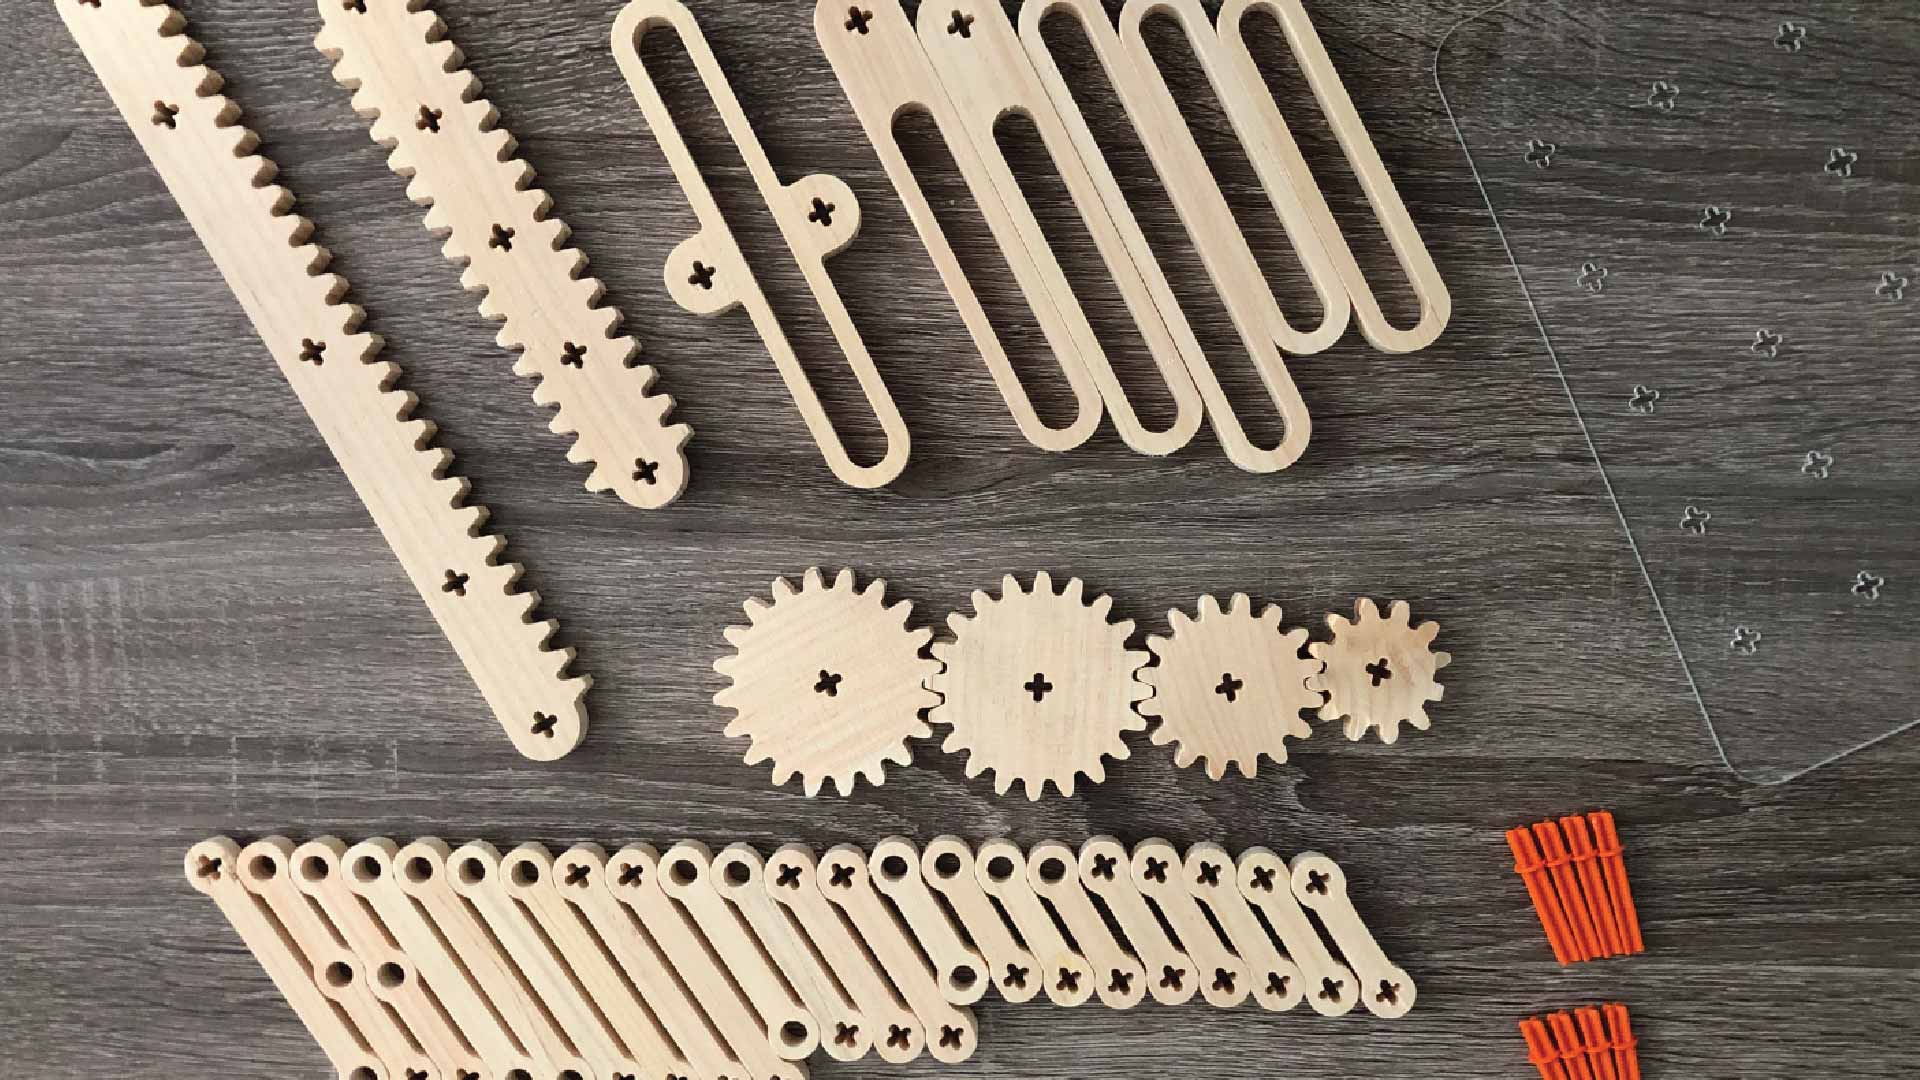 Pivot parts and gears